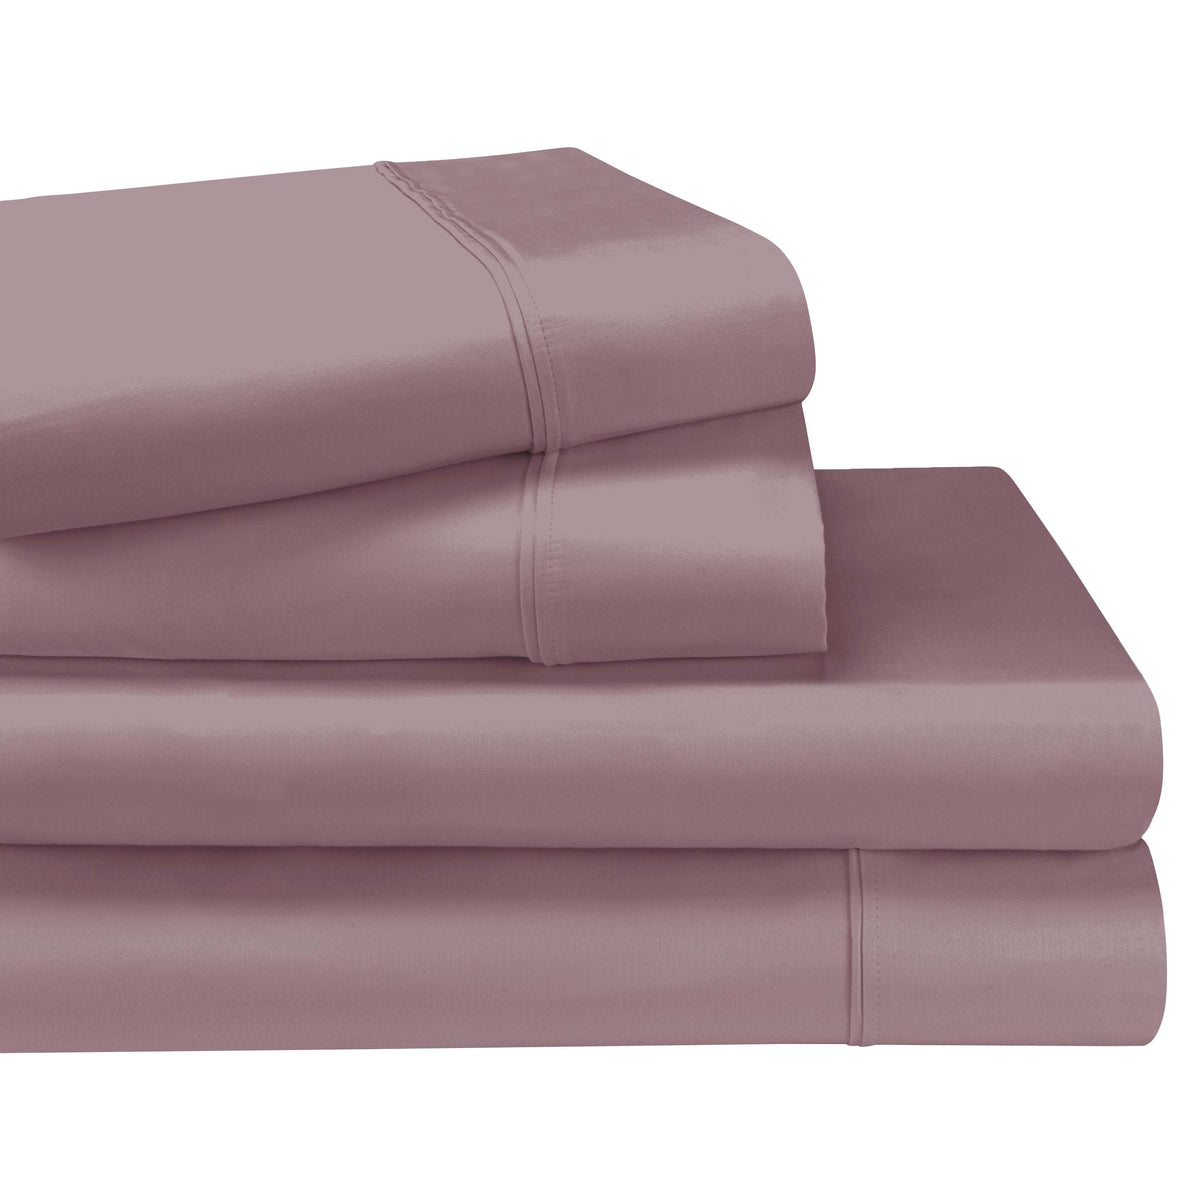 Egyptian Cotton 1200 Thread Count Eco-Friendly Solid Sheet Set - Zephyr